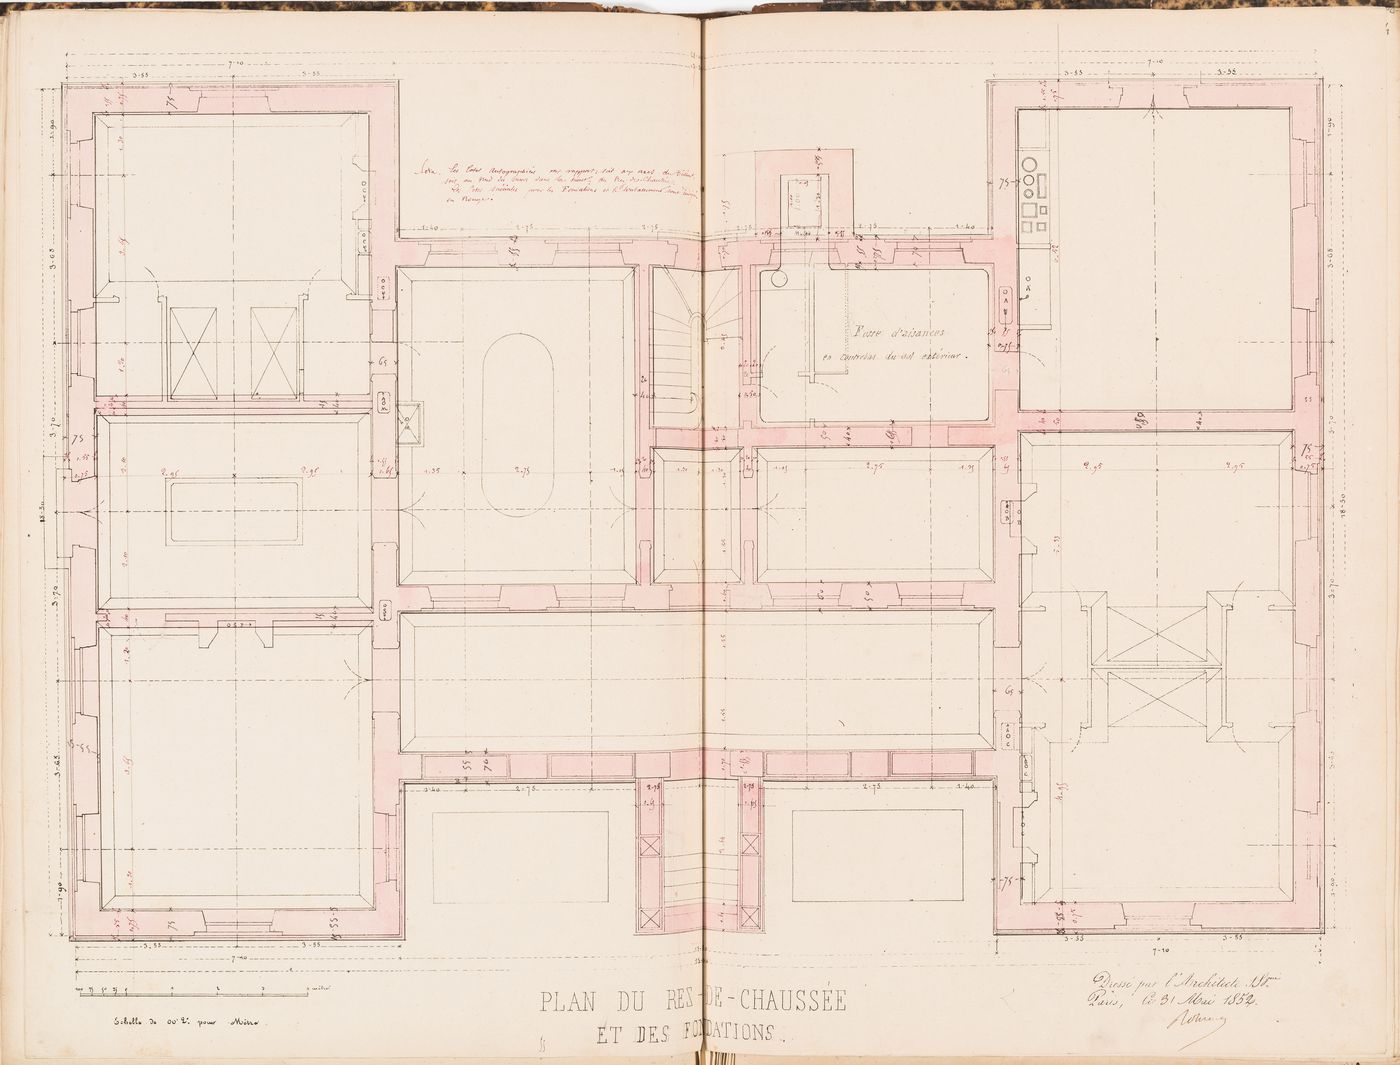 Ground floor and foundation plans for a country house for Madame de Lescure, Royan